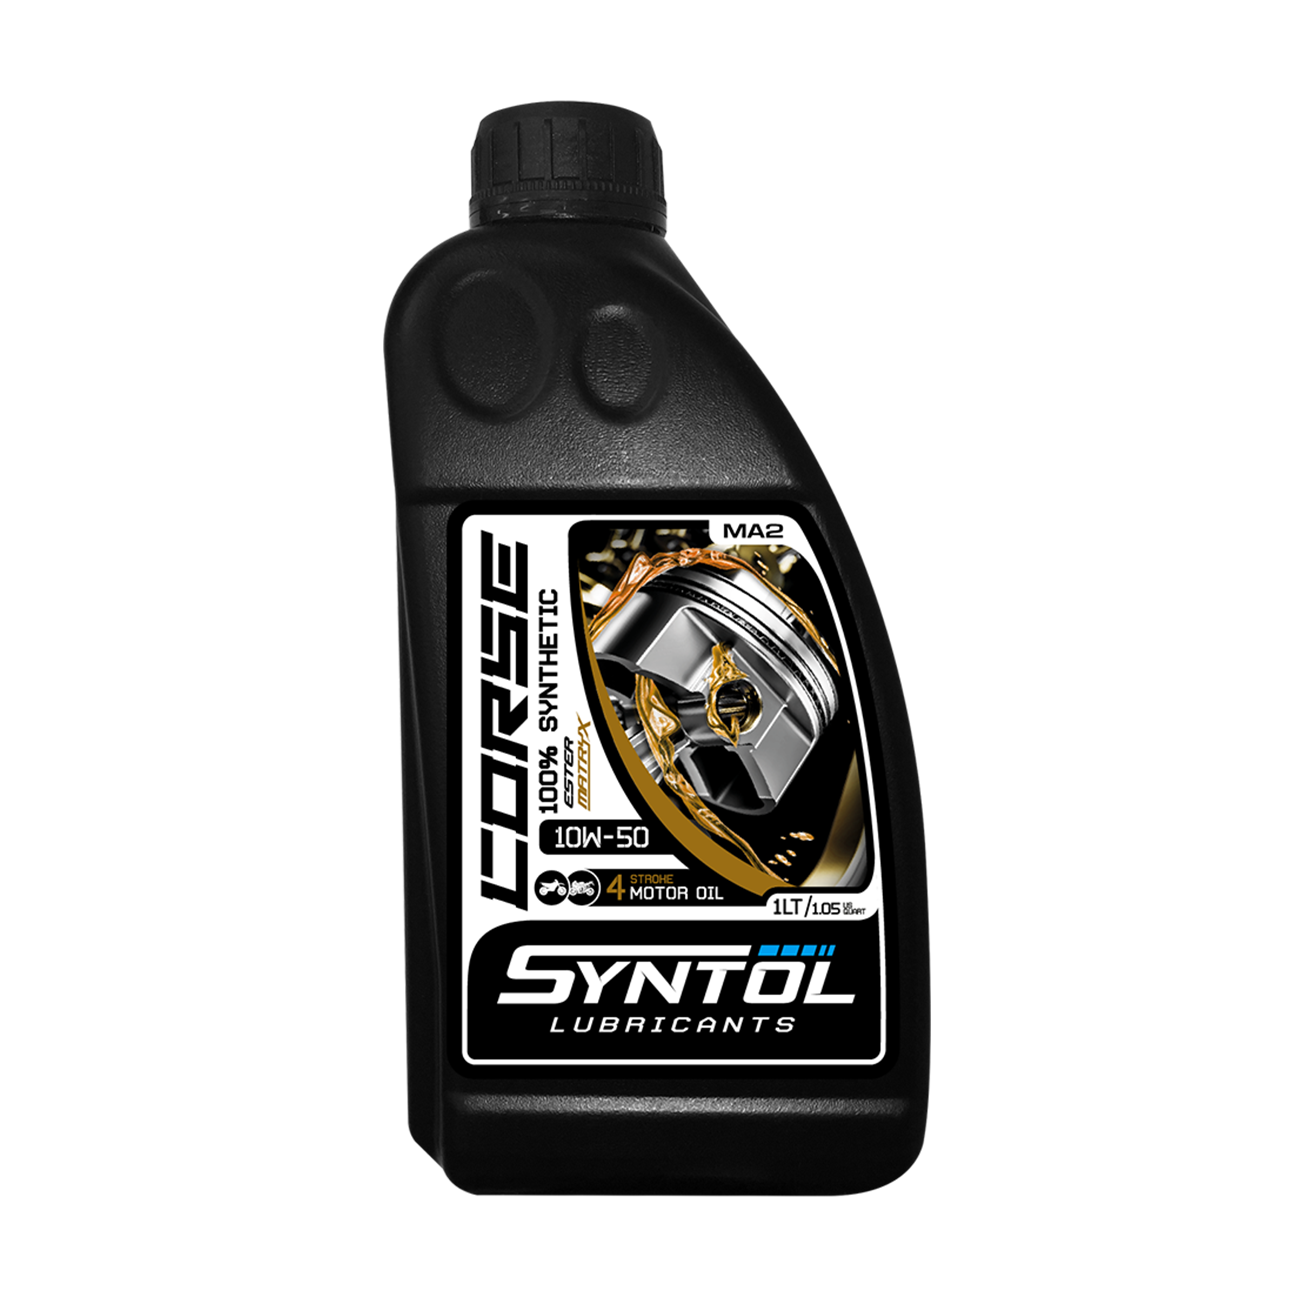 SYNTOL CORSE 4T 10W-50 1 litre motor oil container